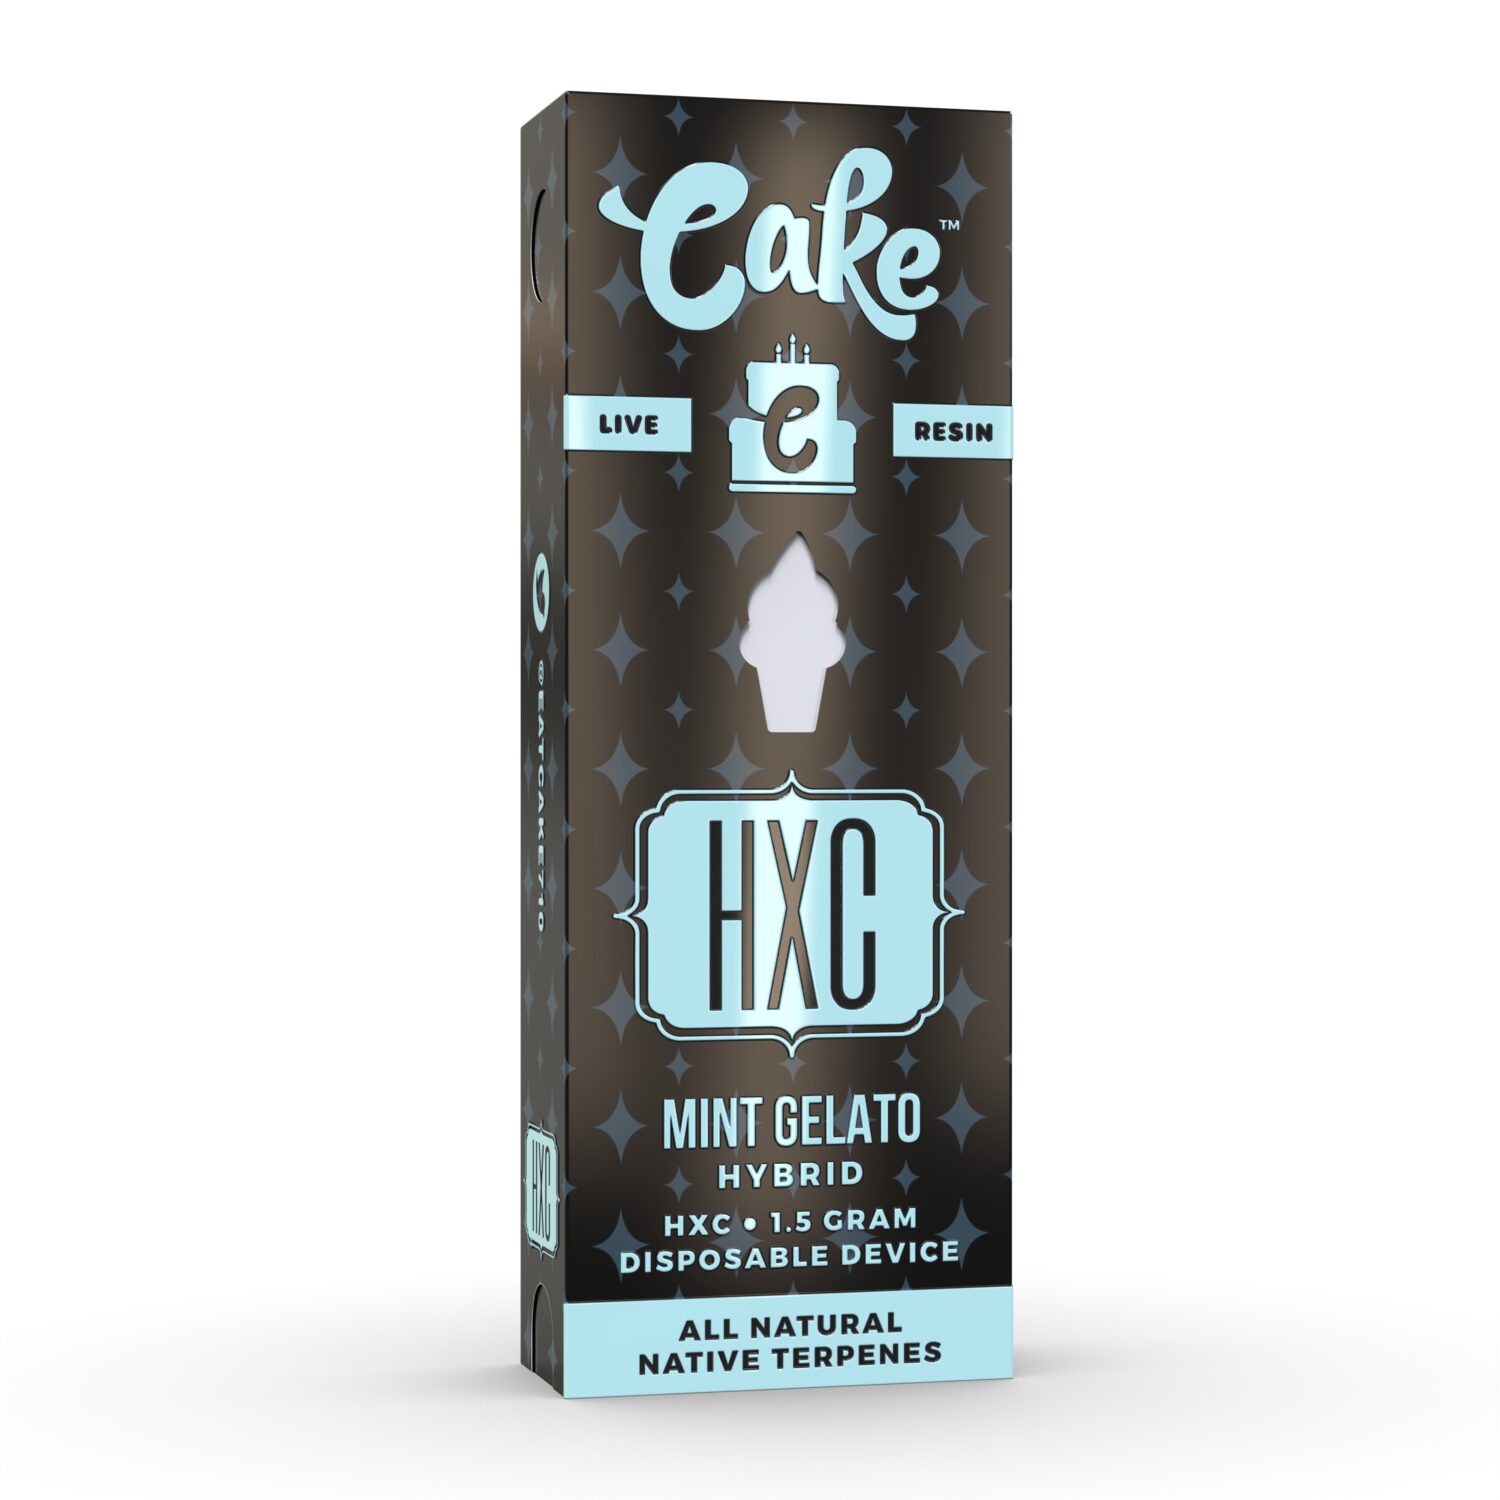 Cake-HXC-Live-Resin-Disposable-mint-gelato-scaled-1.jpg